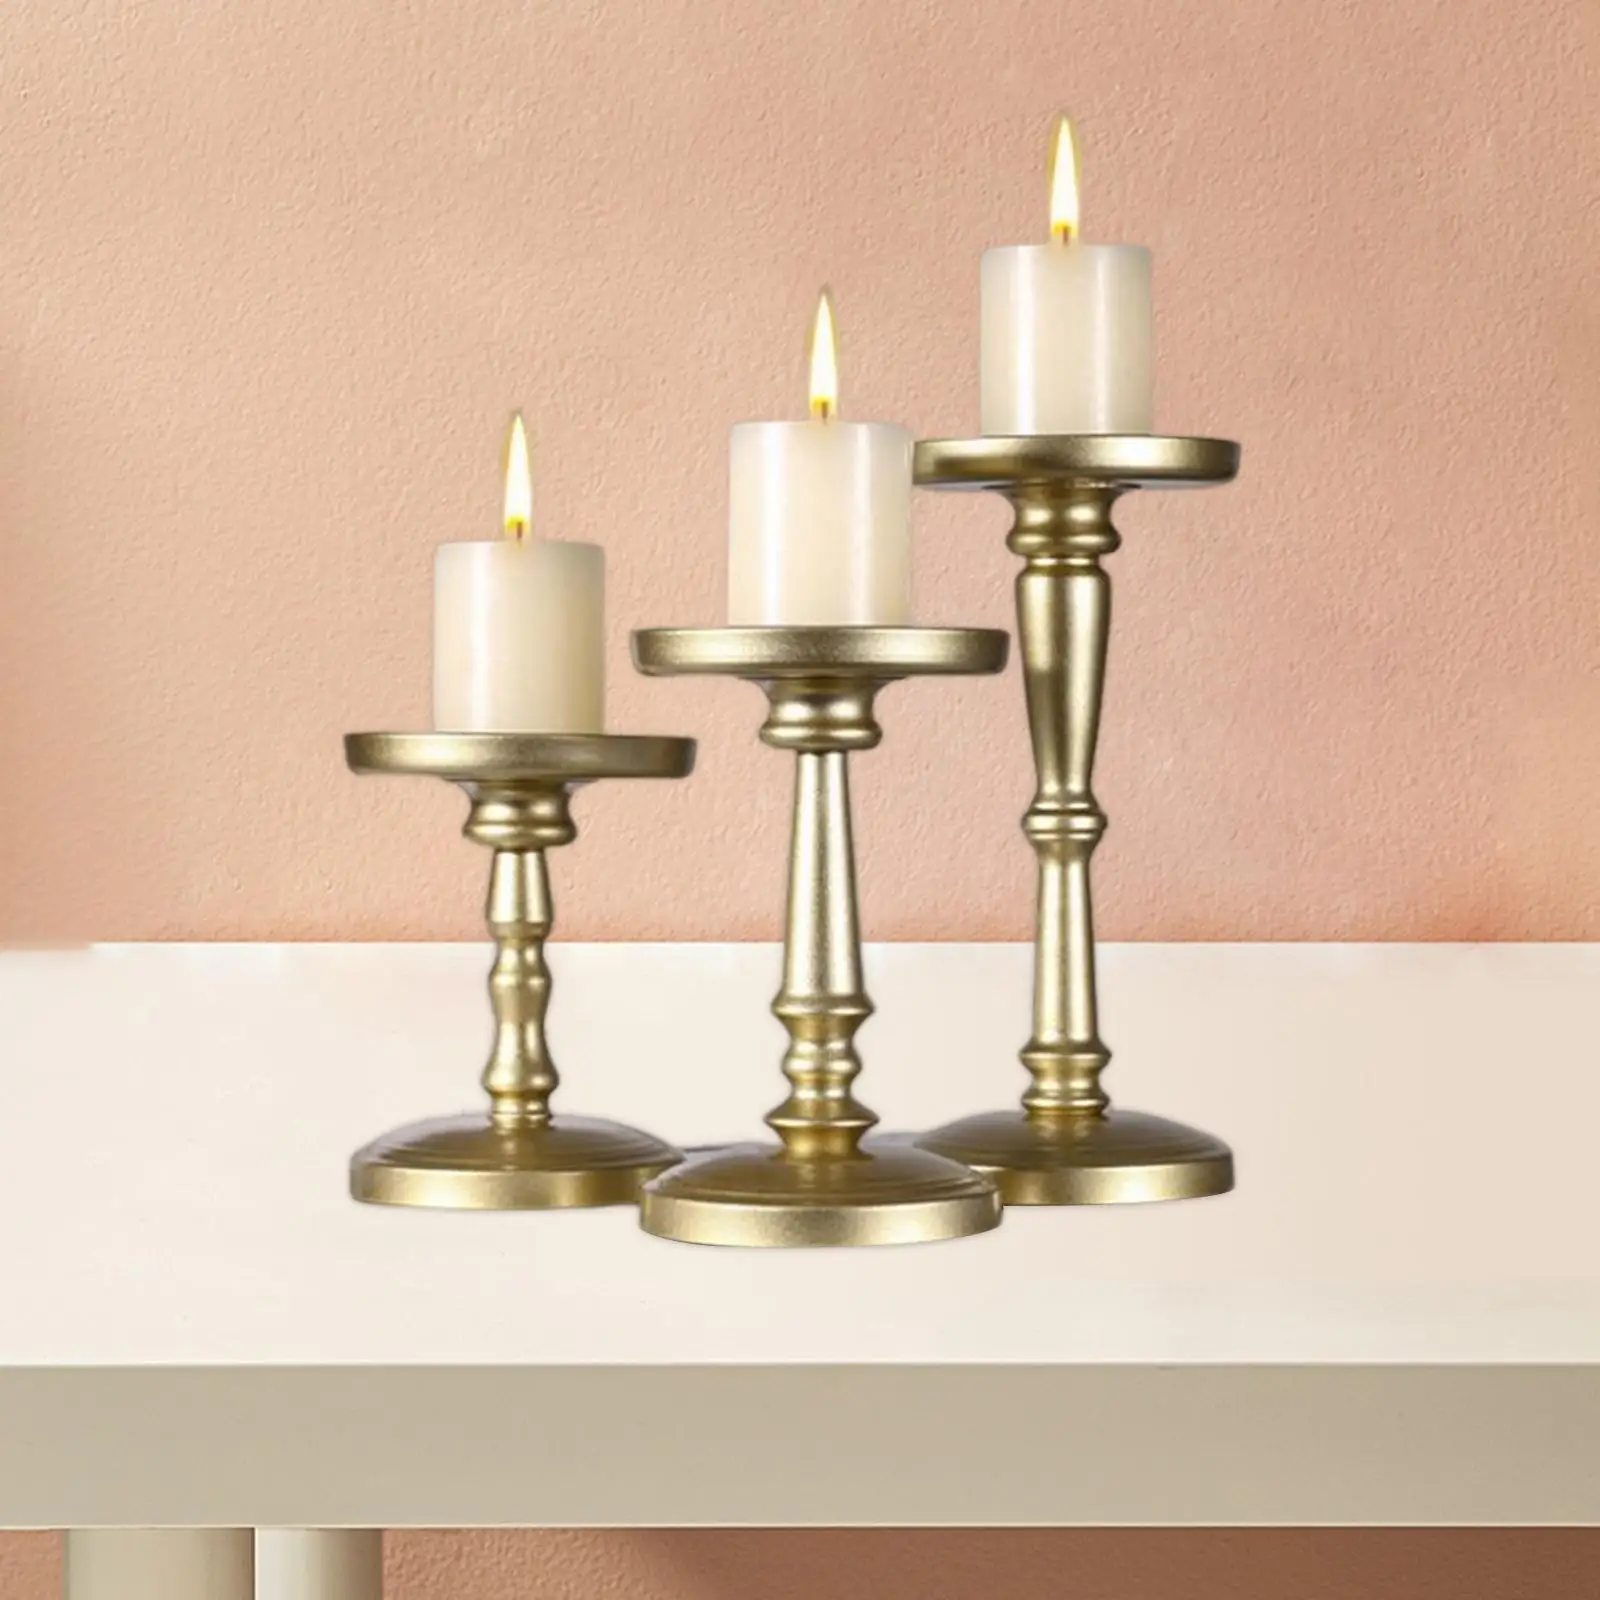 3x Metal Pillar Candle Holders Candle Stands Ornaments Candelabra for Centerpieces living room Farmhouse Decor